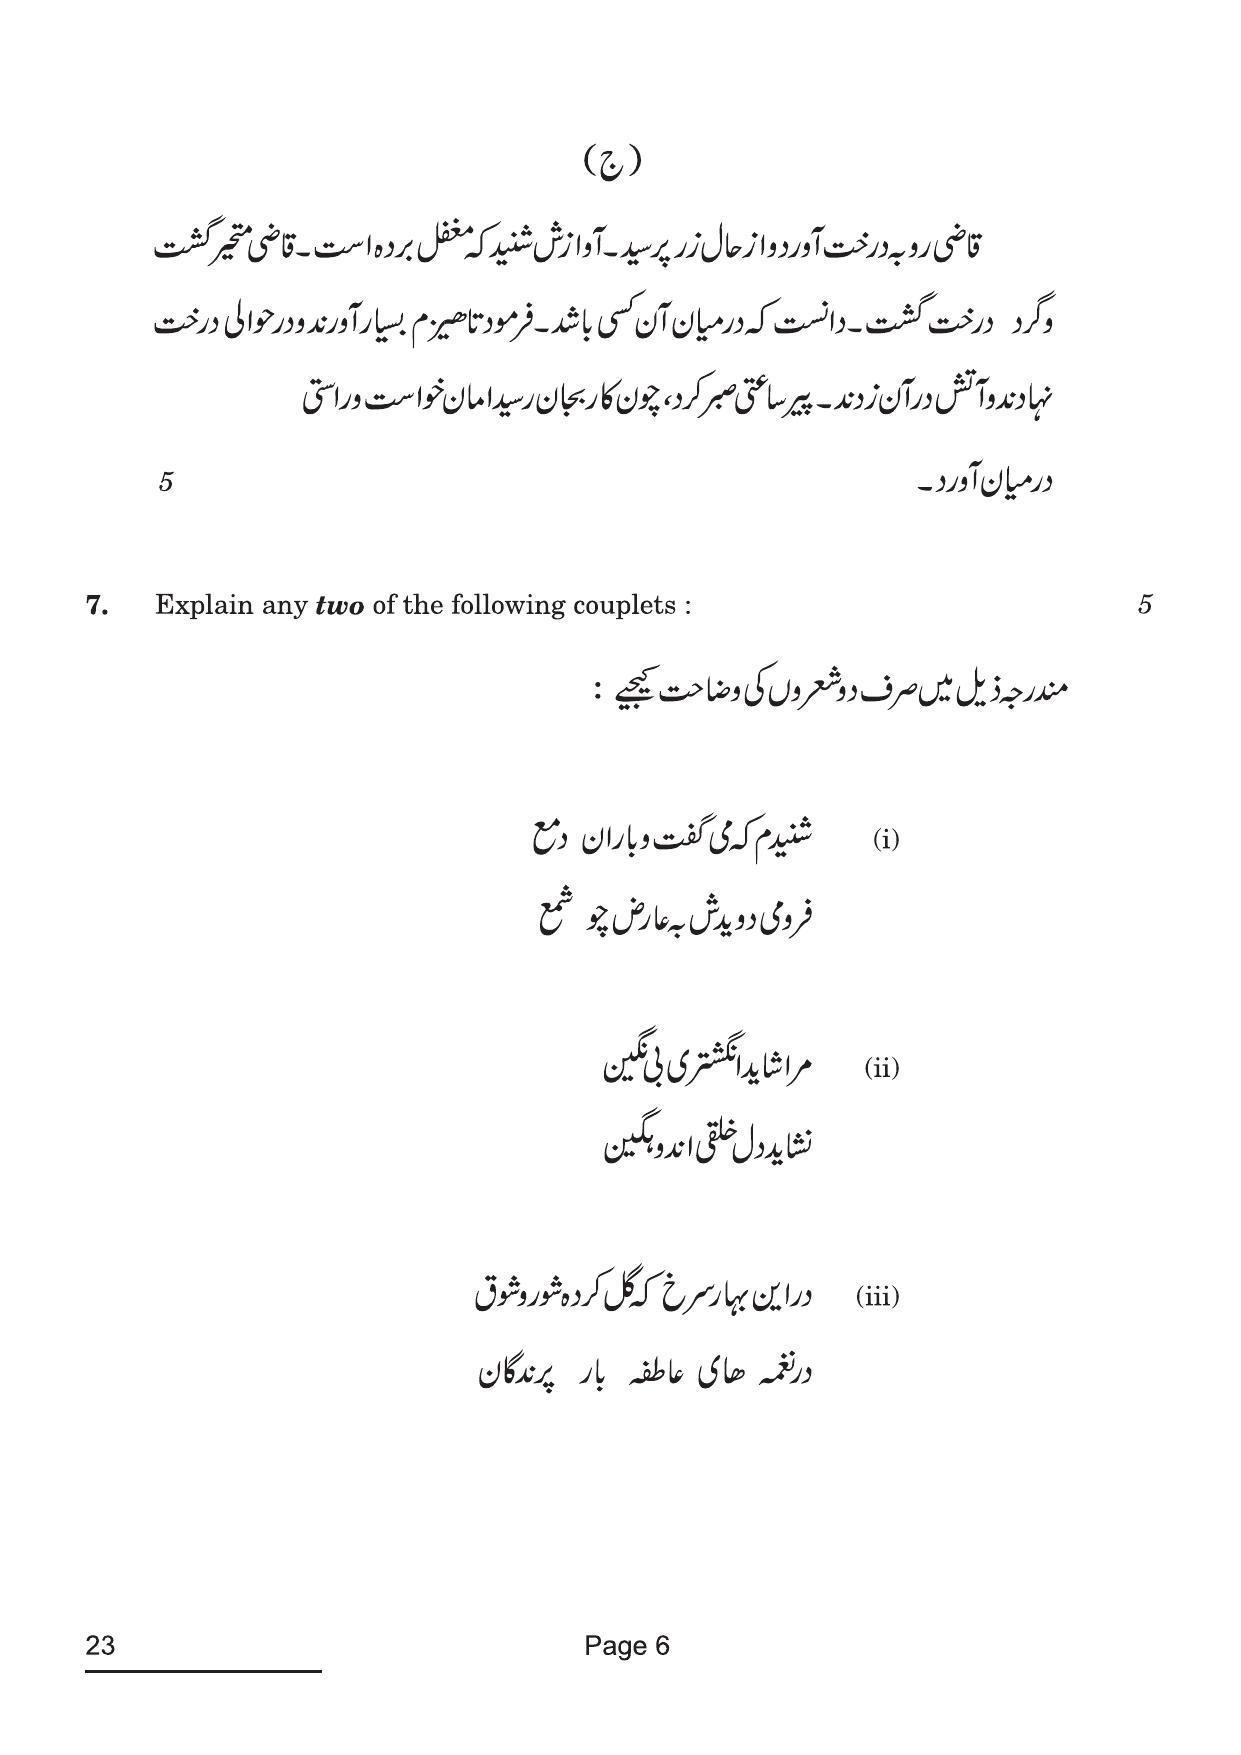 CBSE Class 12 23_Persian 2022 Question Paper - Page 6